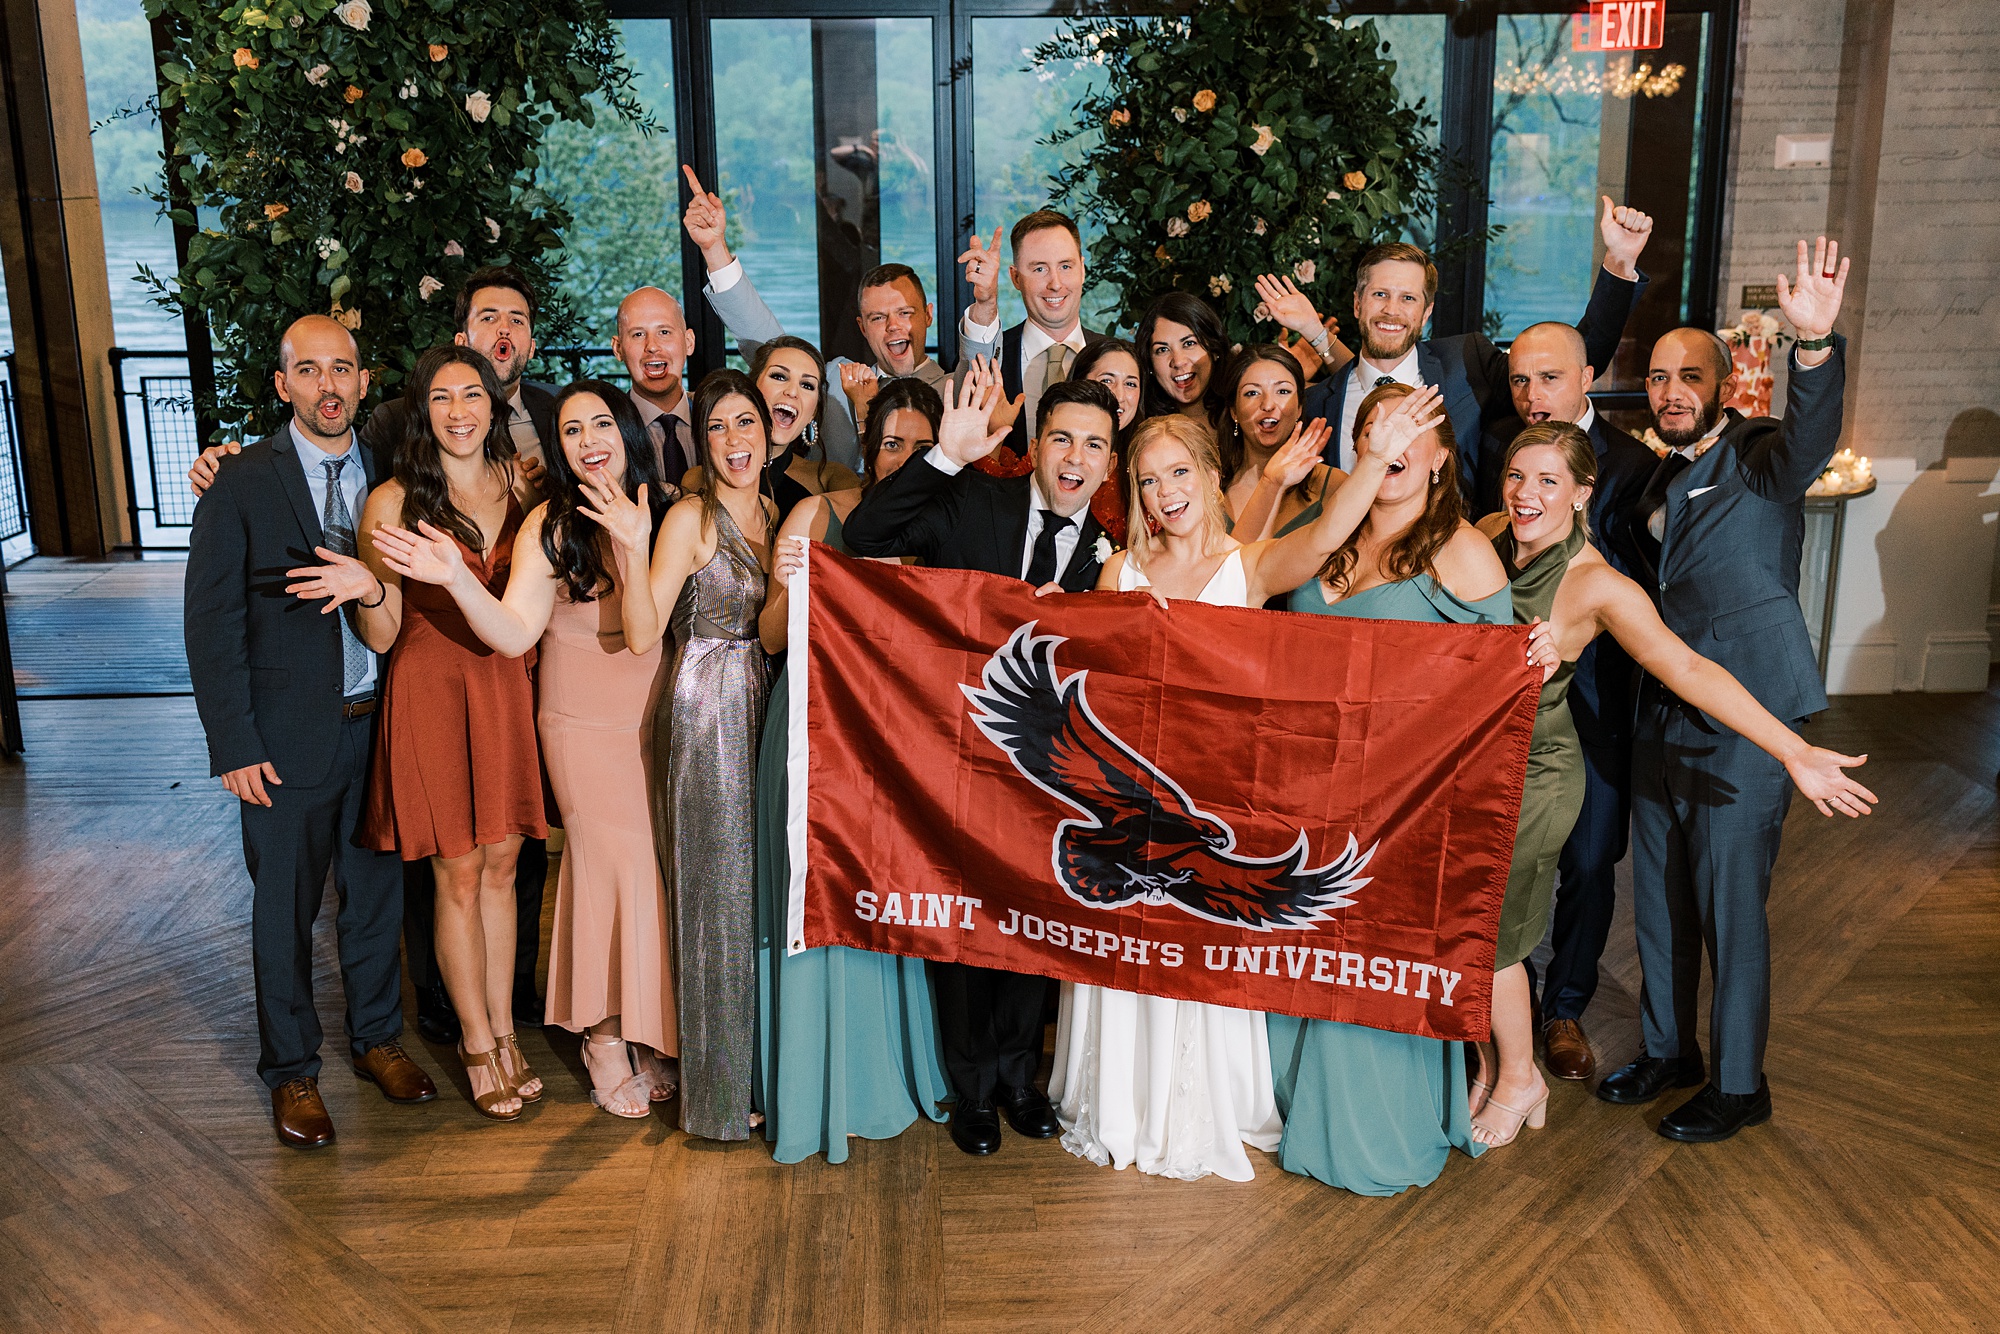 bride and groom pose with college friends and St. Joseph's University flag